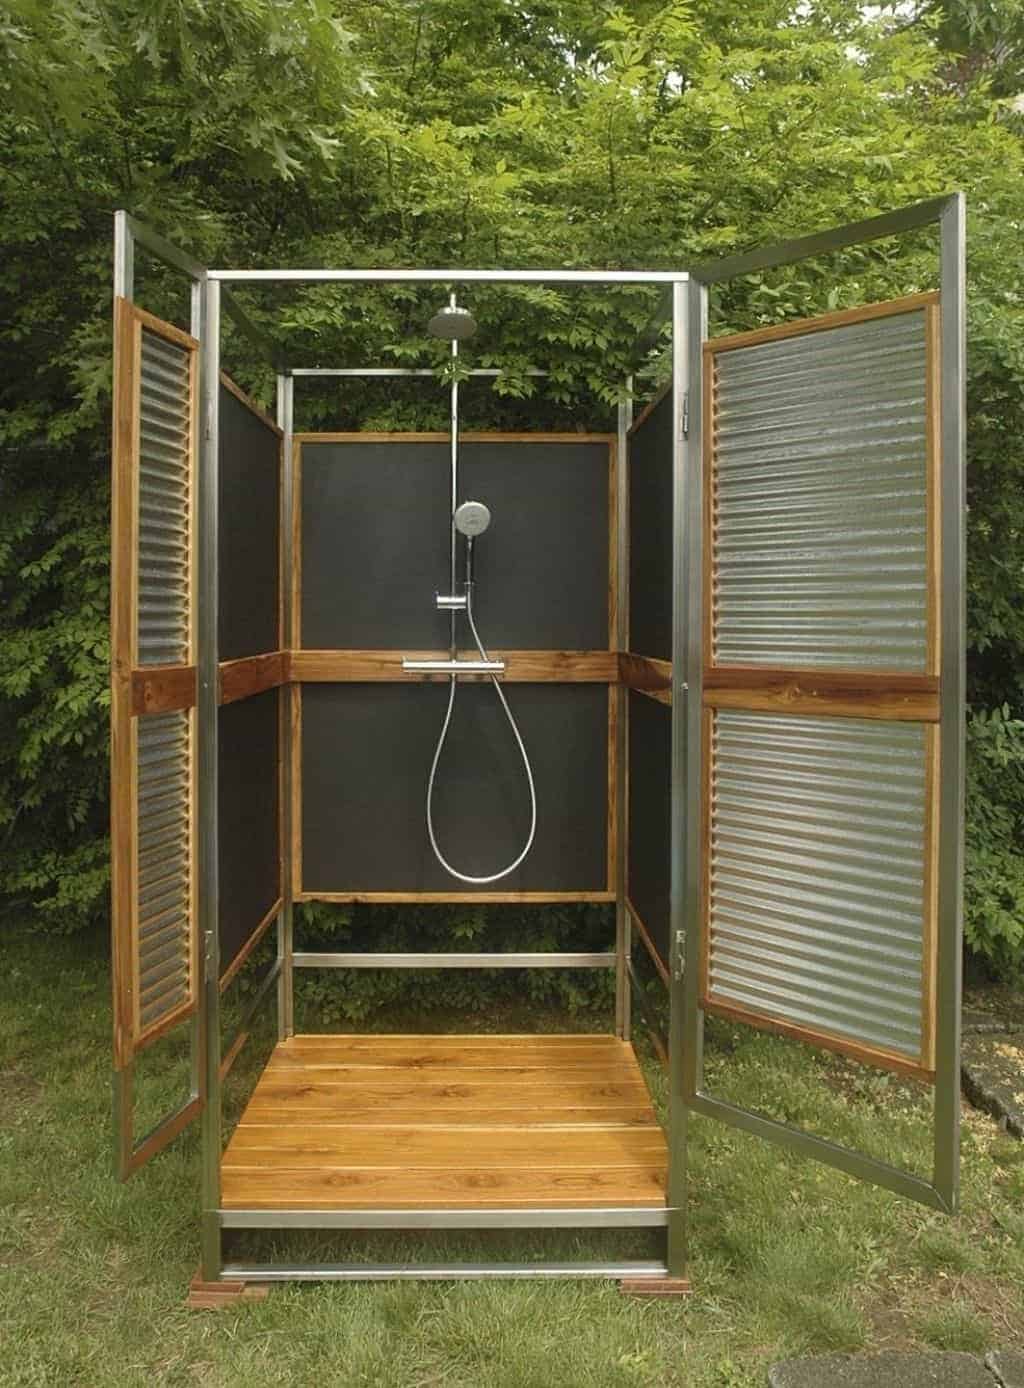 Diy Simple And Elegant Outdoor Shower Plans